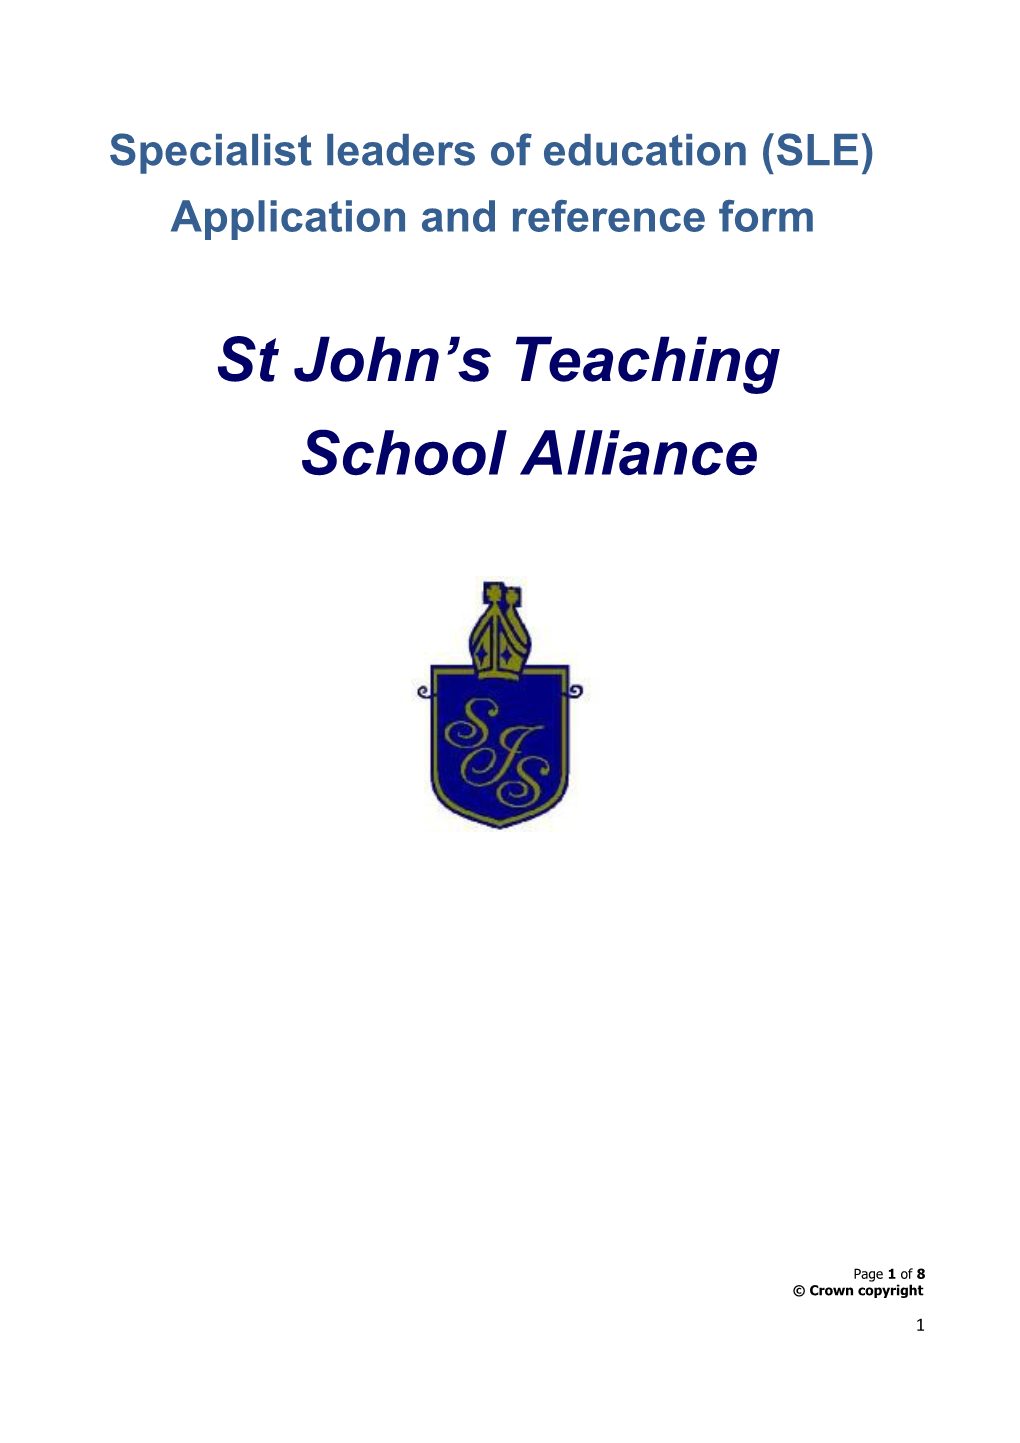 Specialist Leaders of Education (SLE) Application and Reference Form